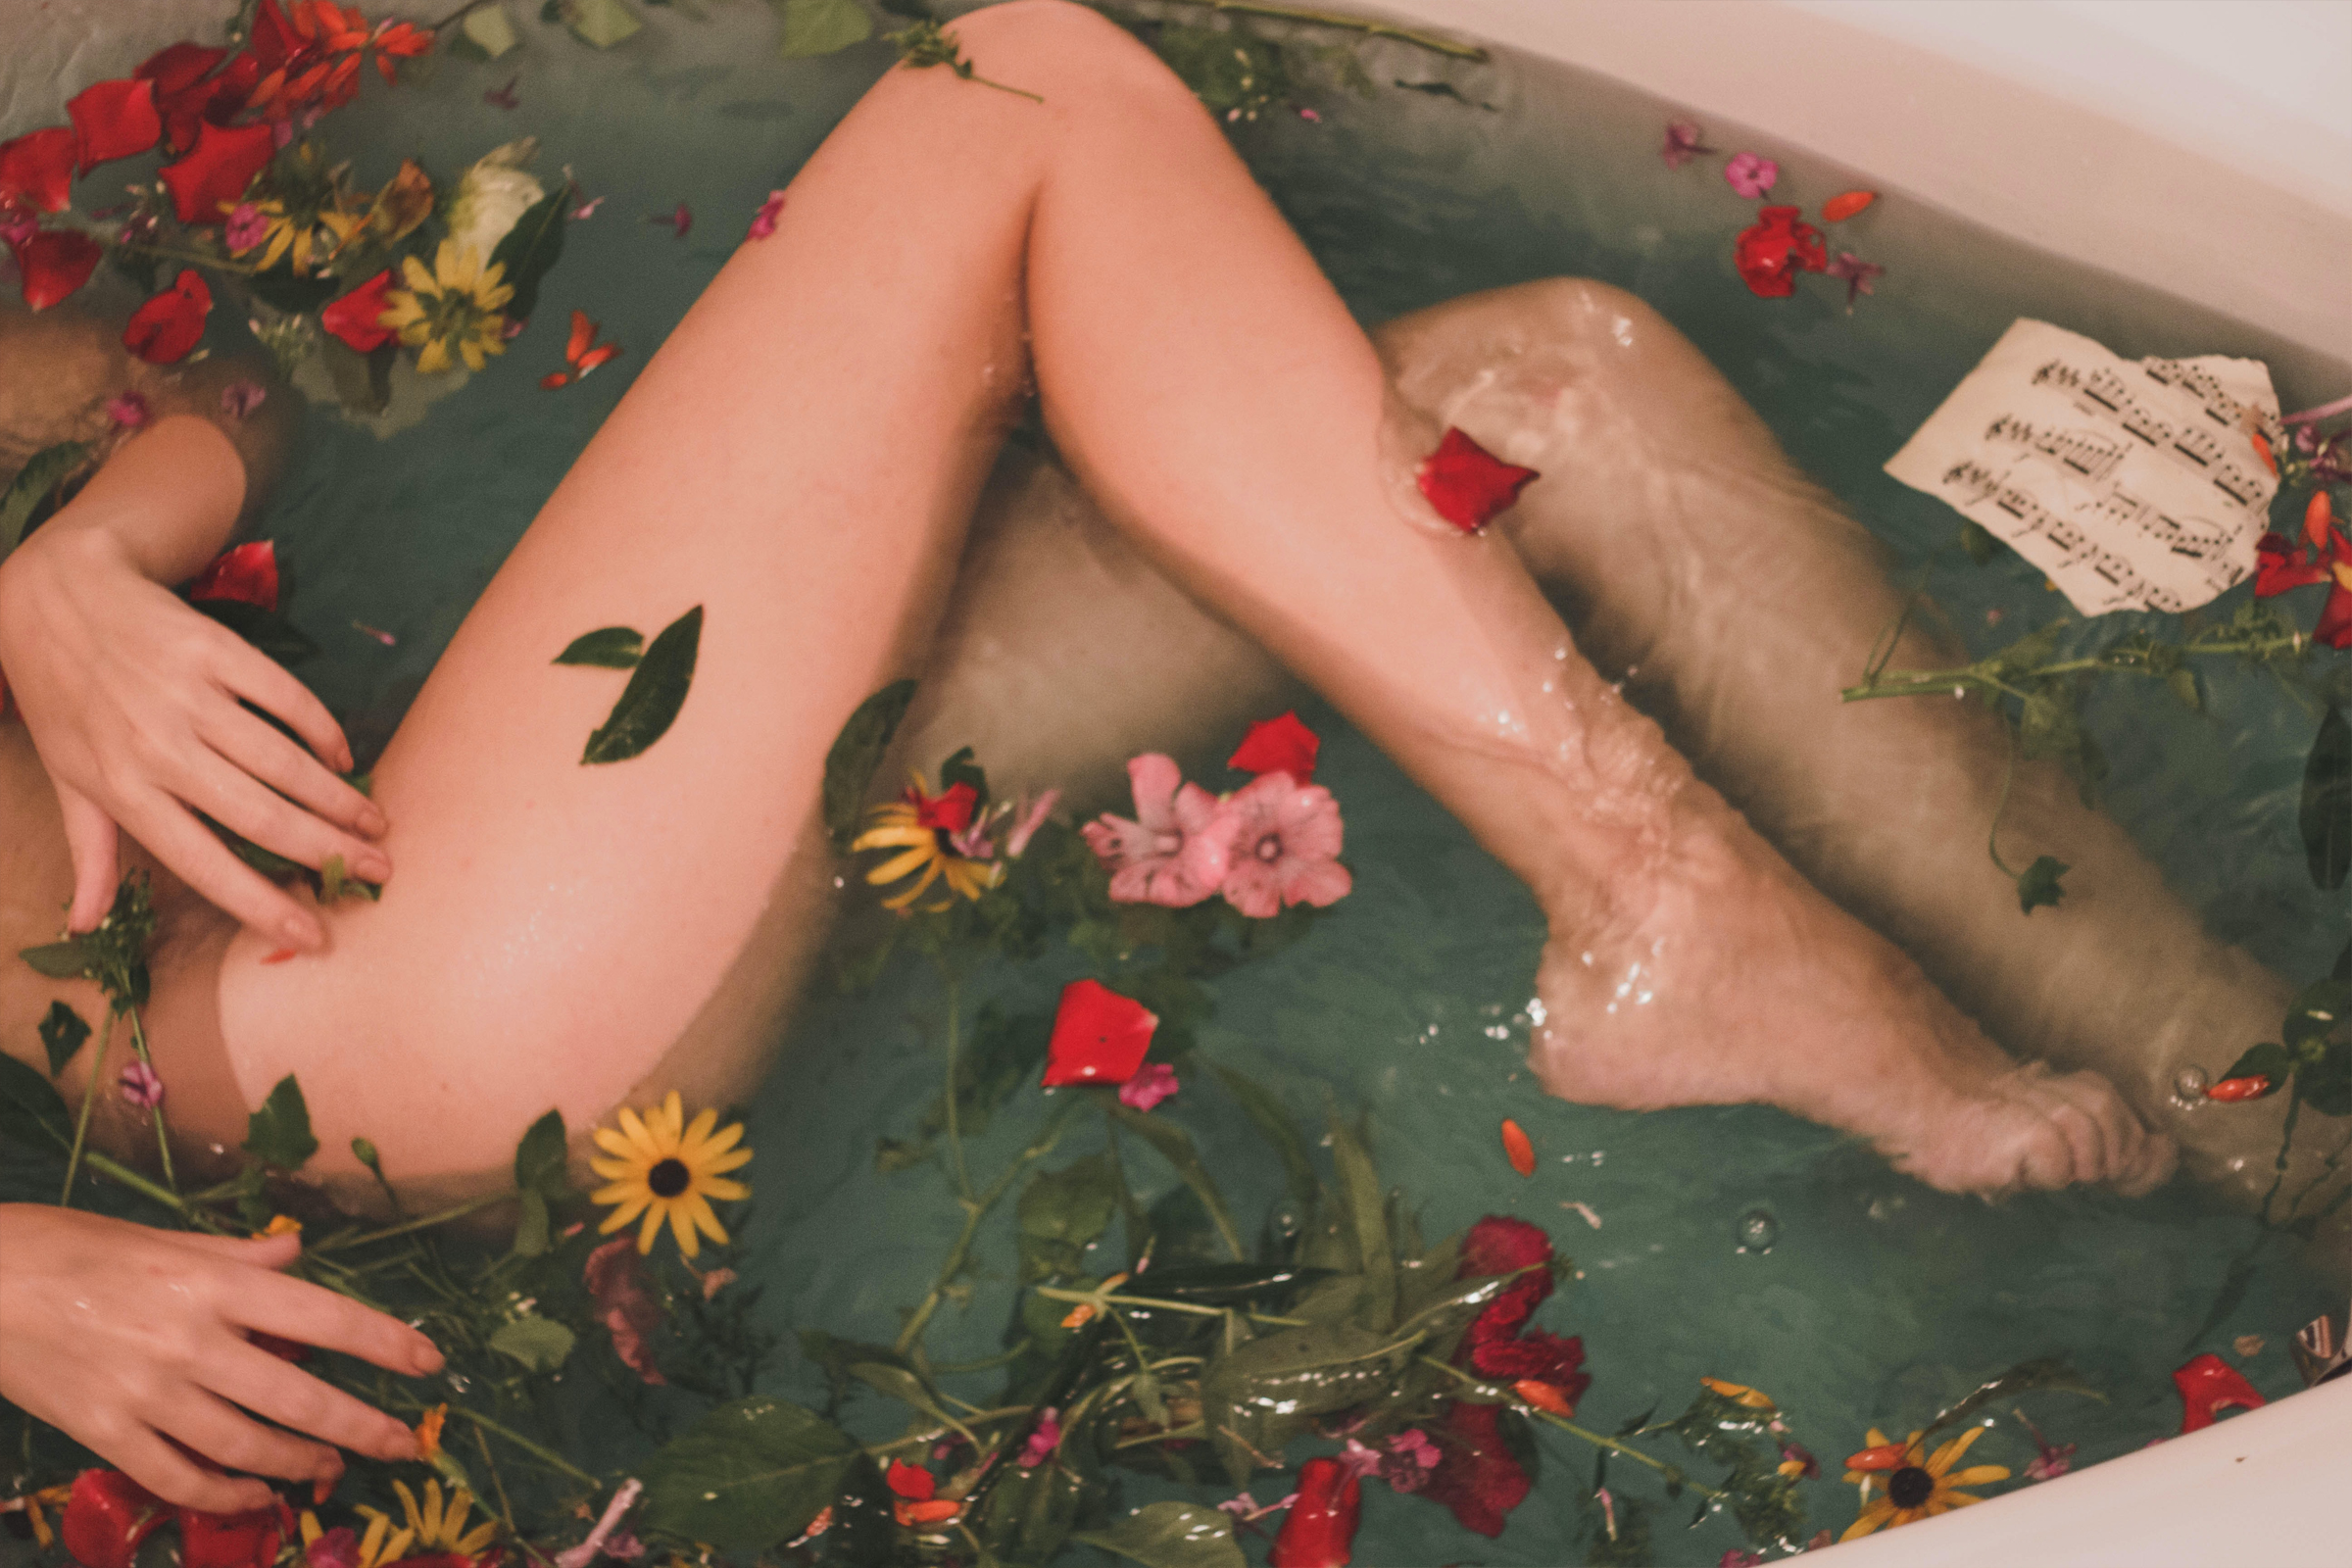 A woman relaxing in the water and flower with waxed legs